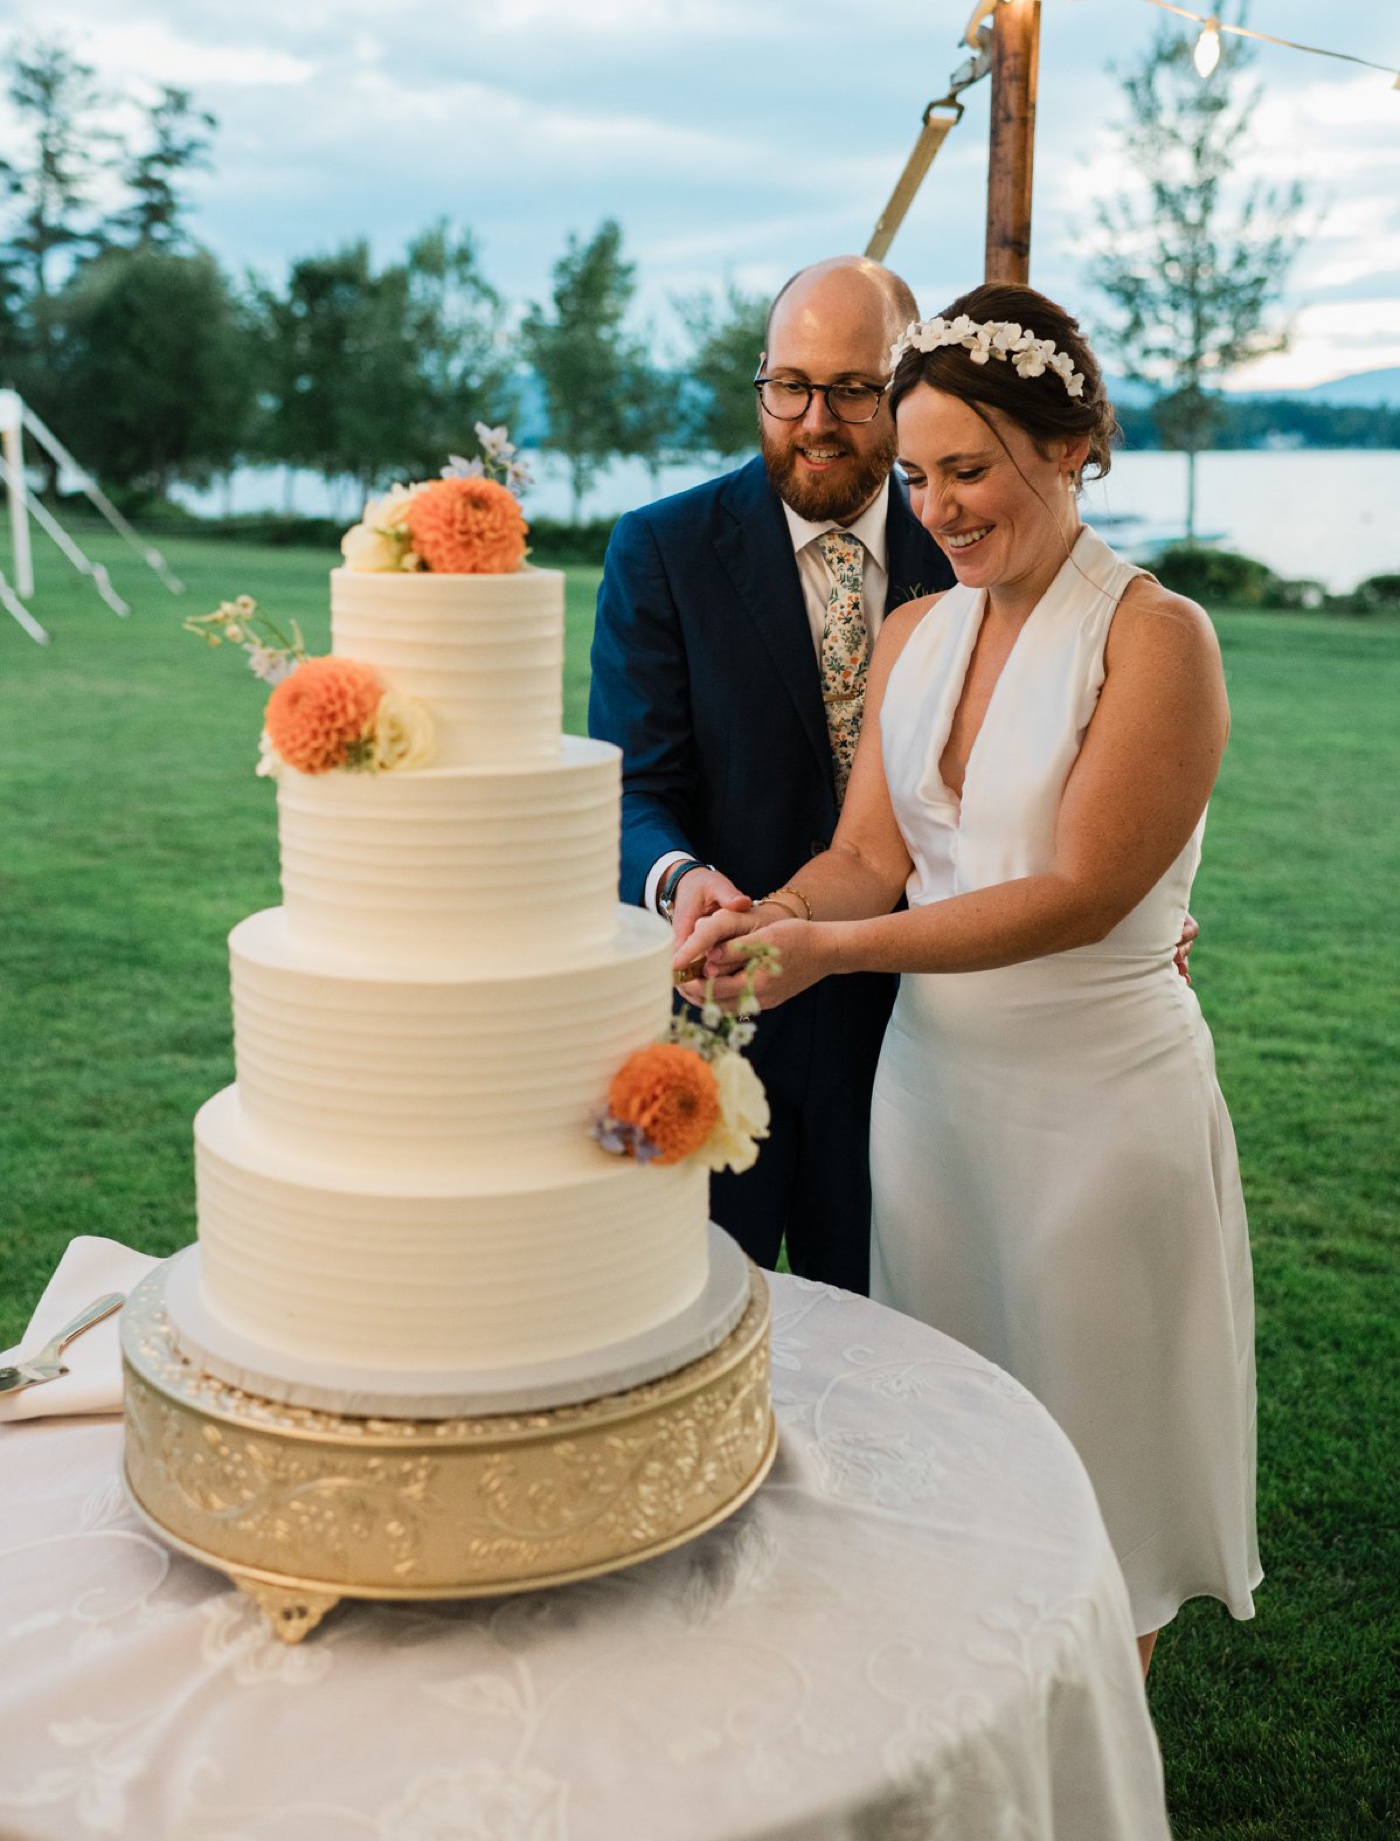 Outdoor tented wedding reception on the Palazzo Field at Brewster Academy